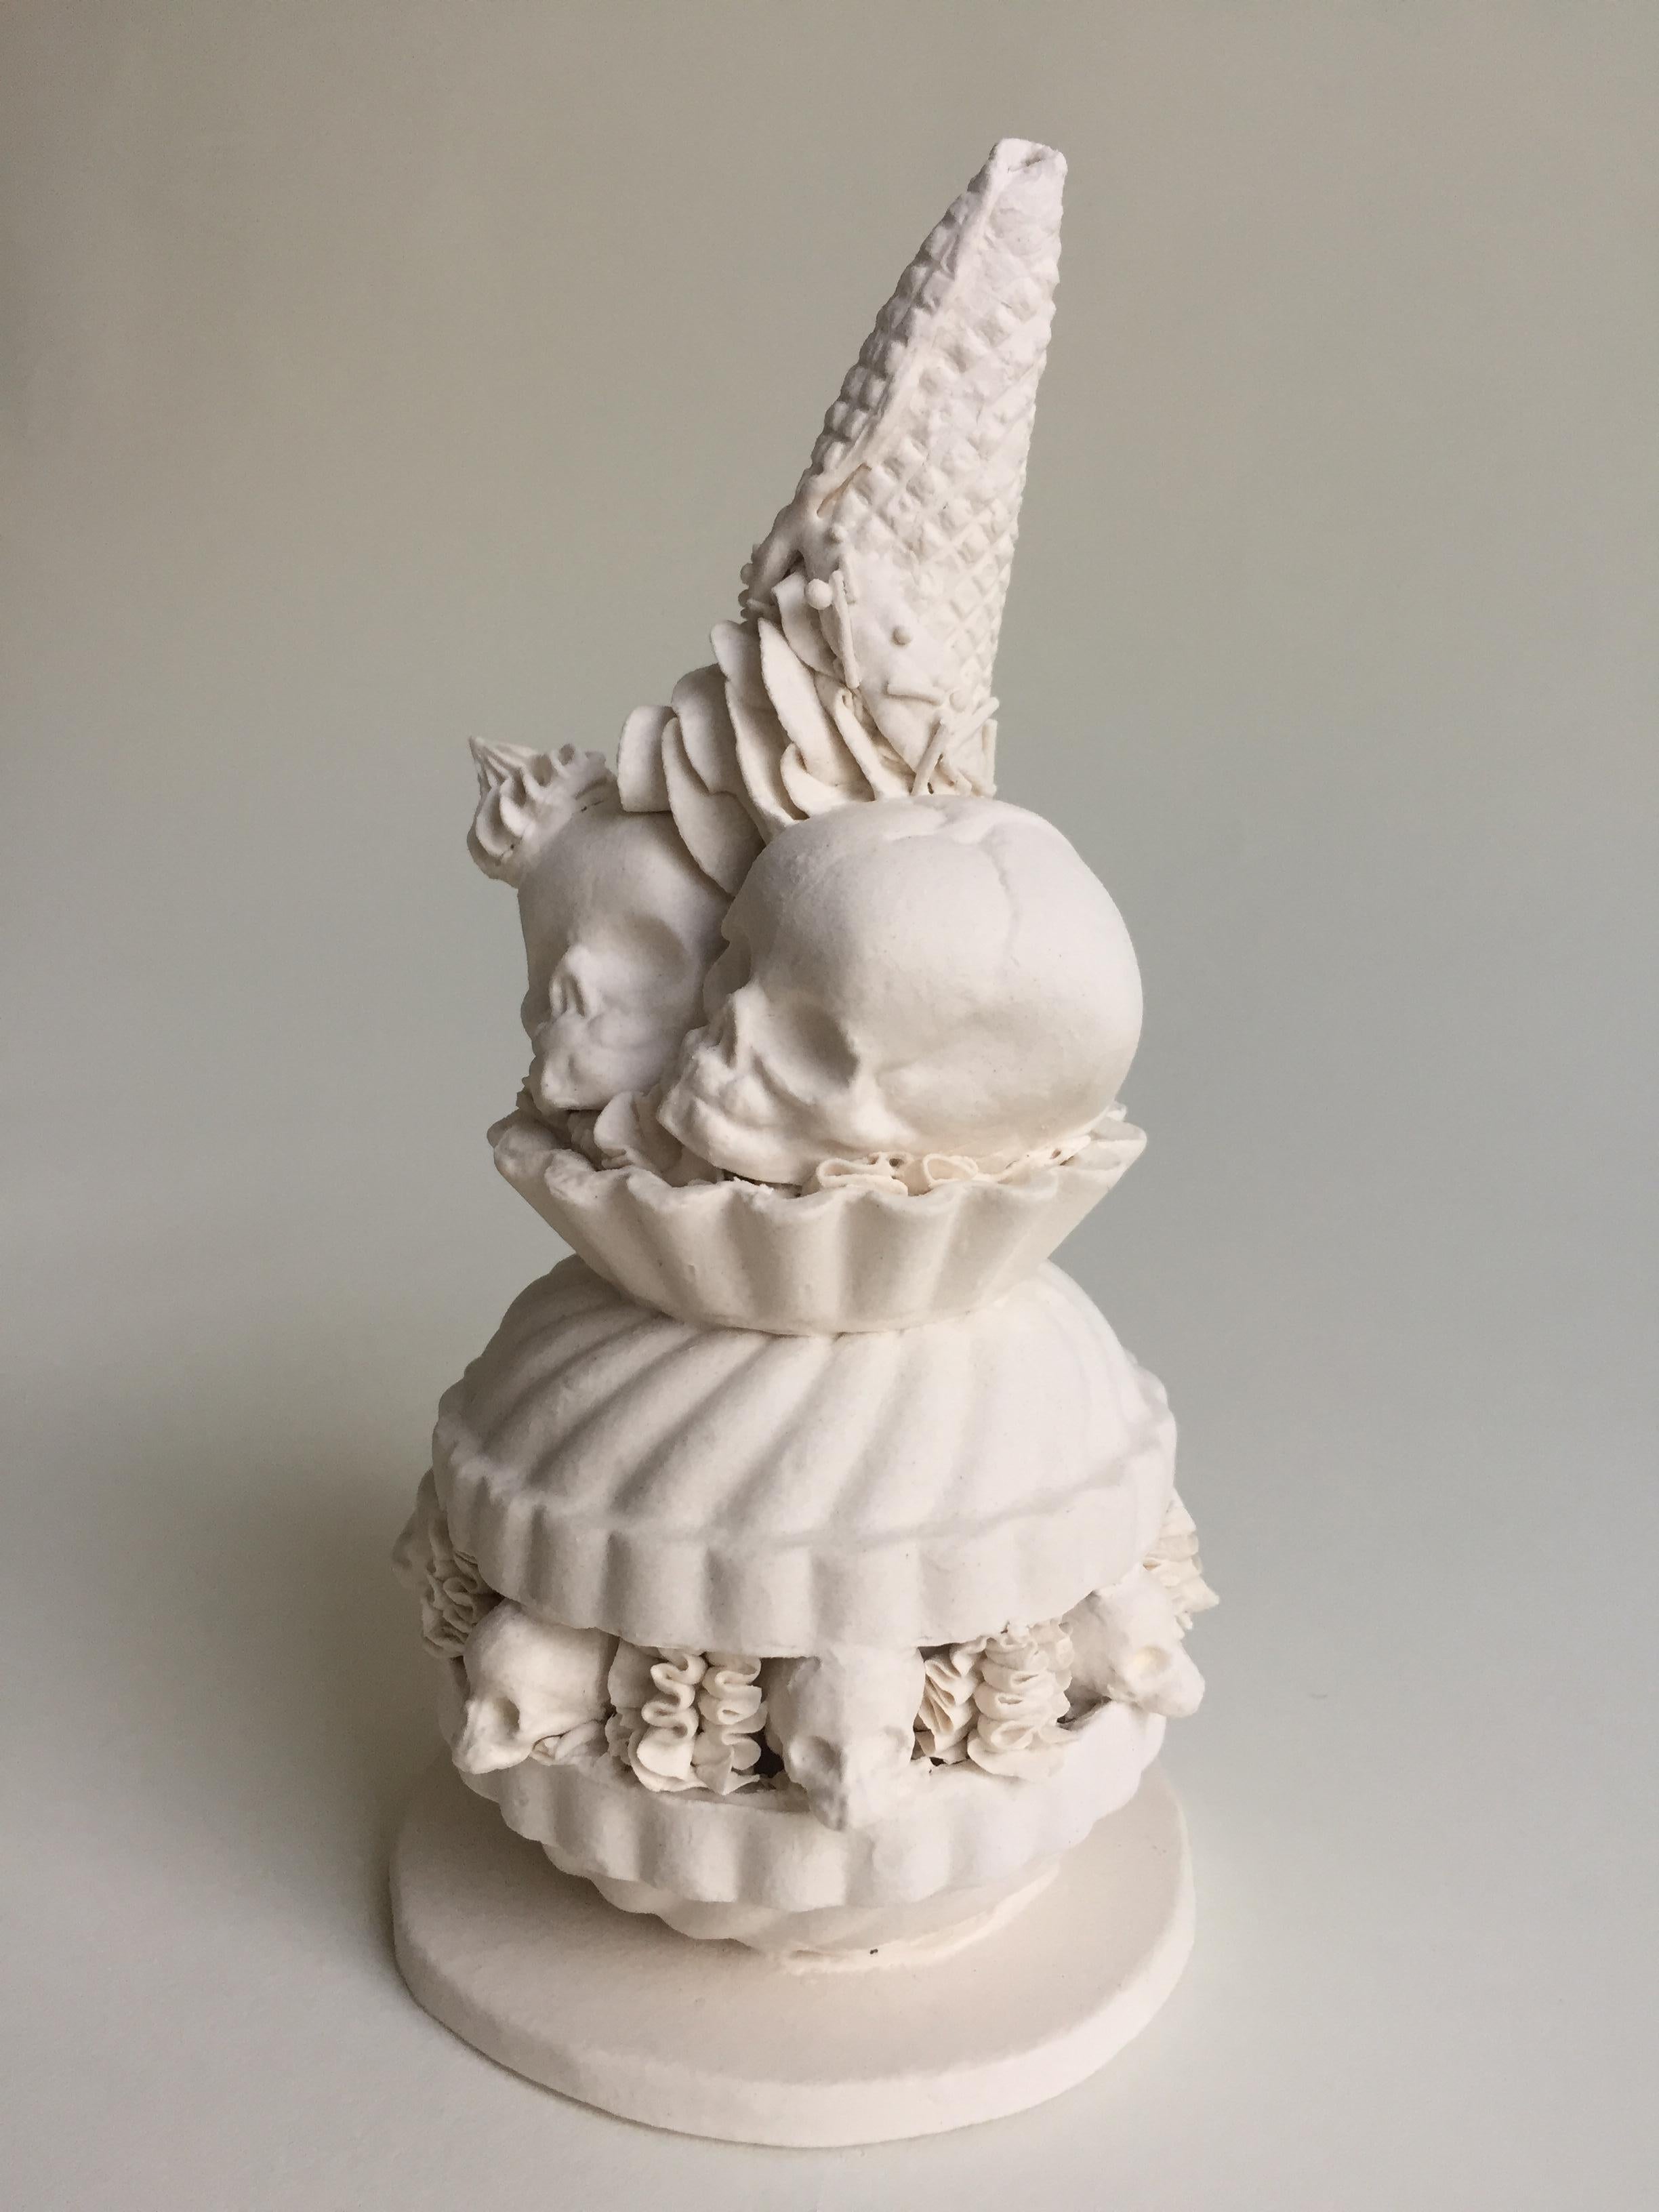 Tea Cake for Two, 2018 - Contemporary Sculpture by Jacqueline Tse